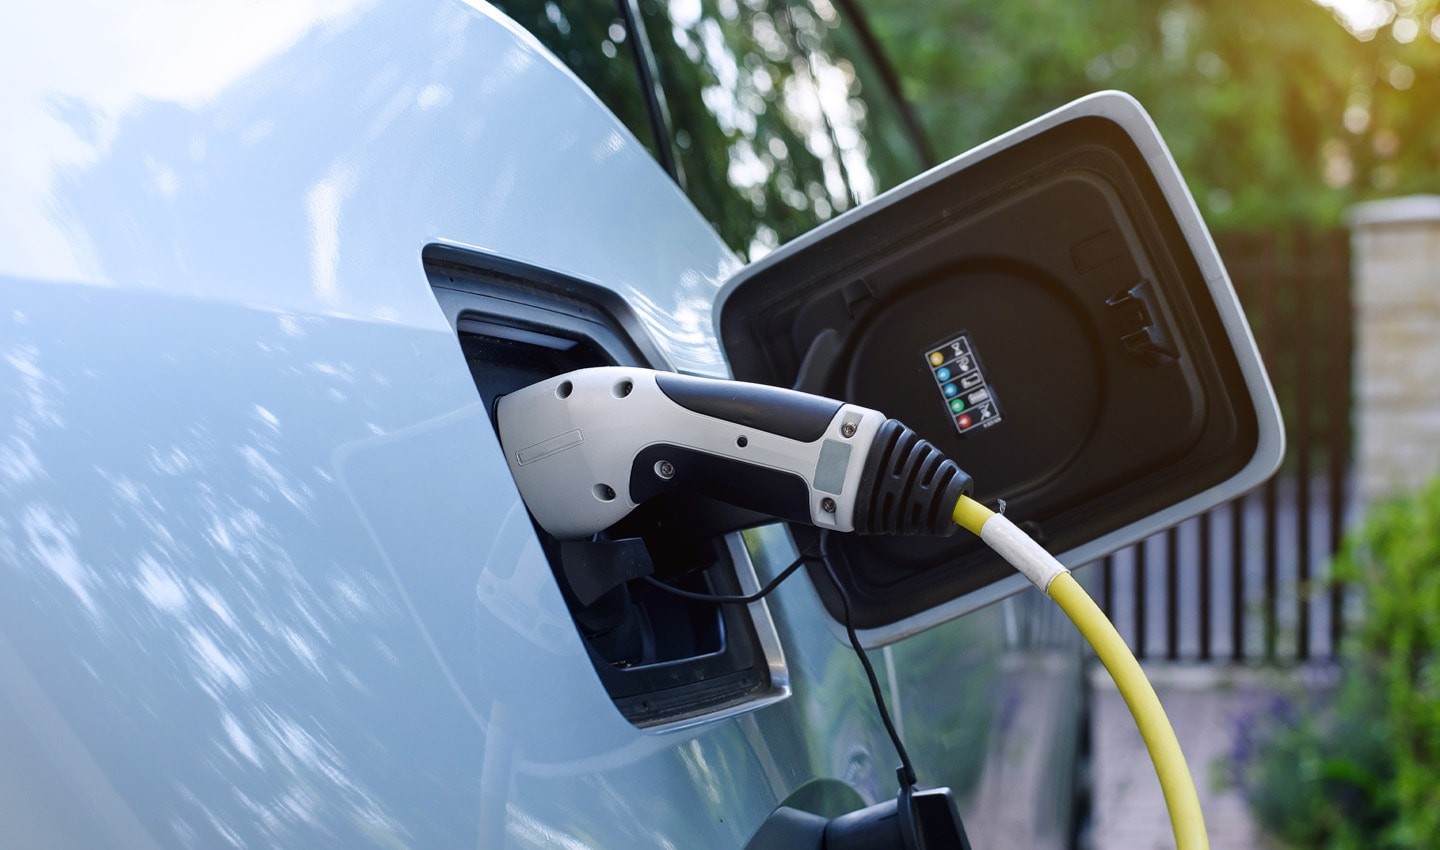 ConnectDER and Siemens’ new home EV charging technology could cut down home EV charger installations costs in the US by 60-80%.